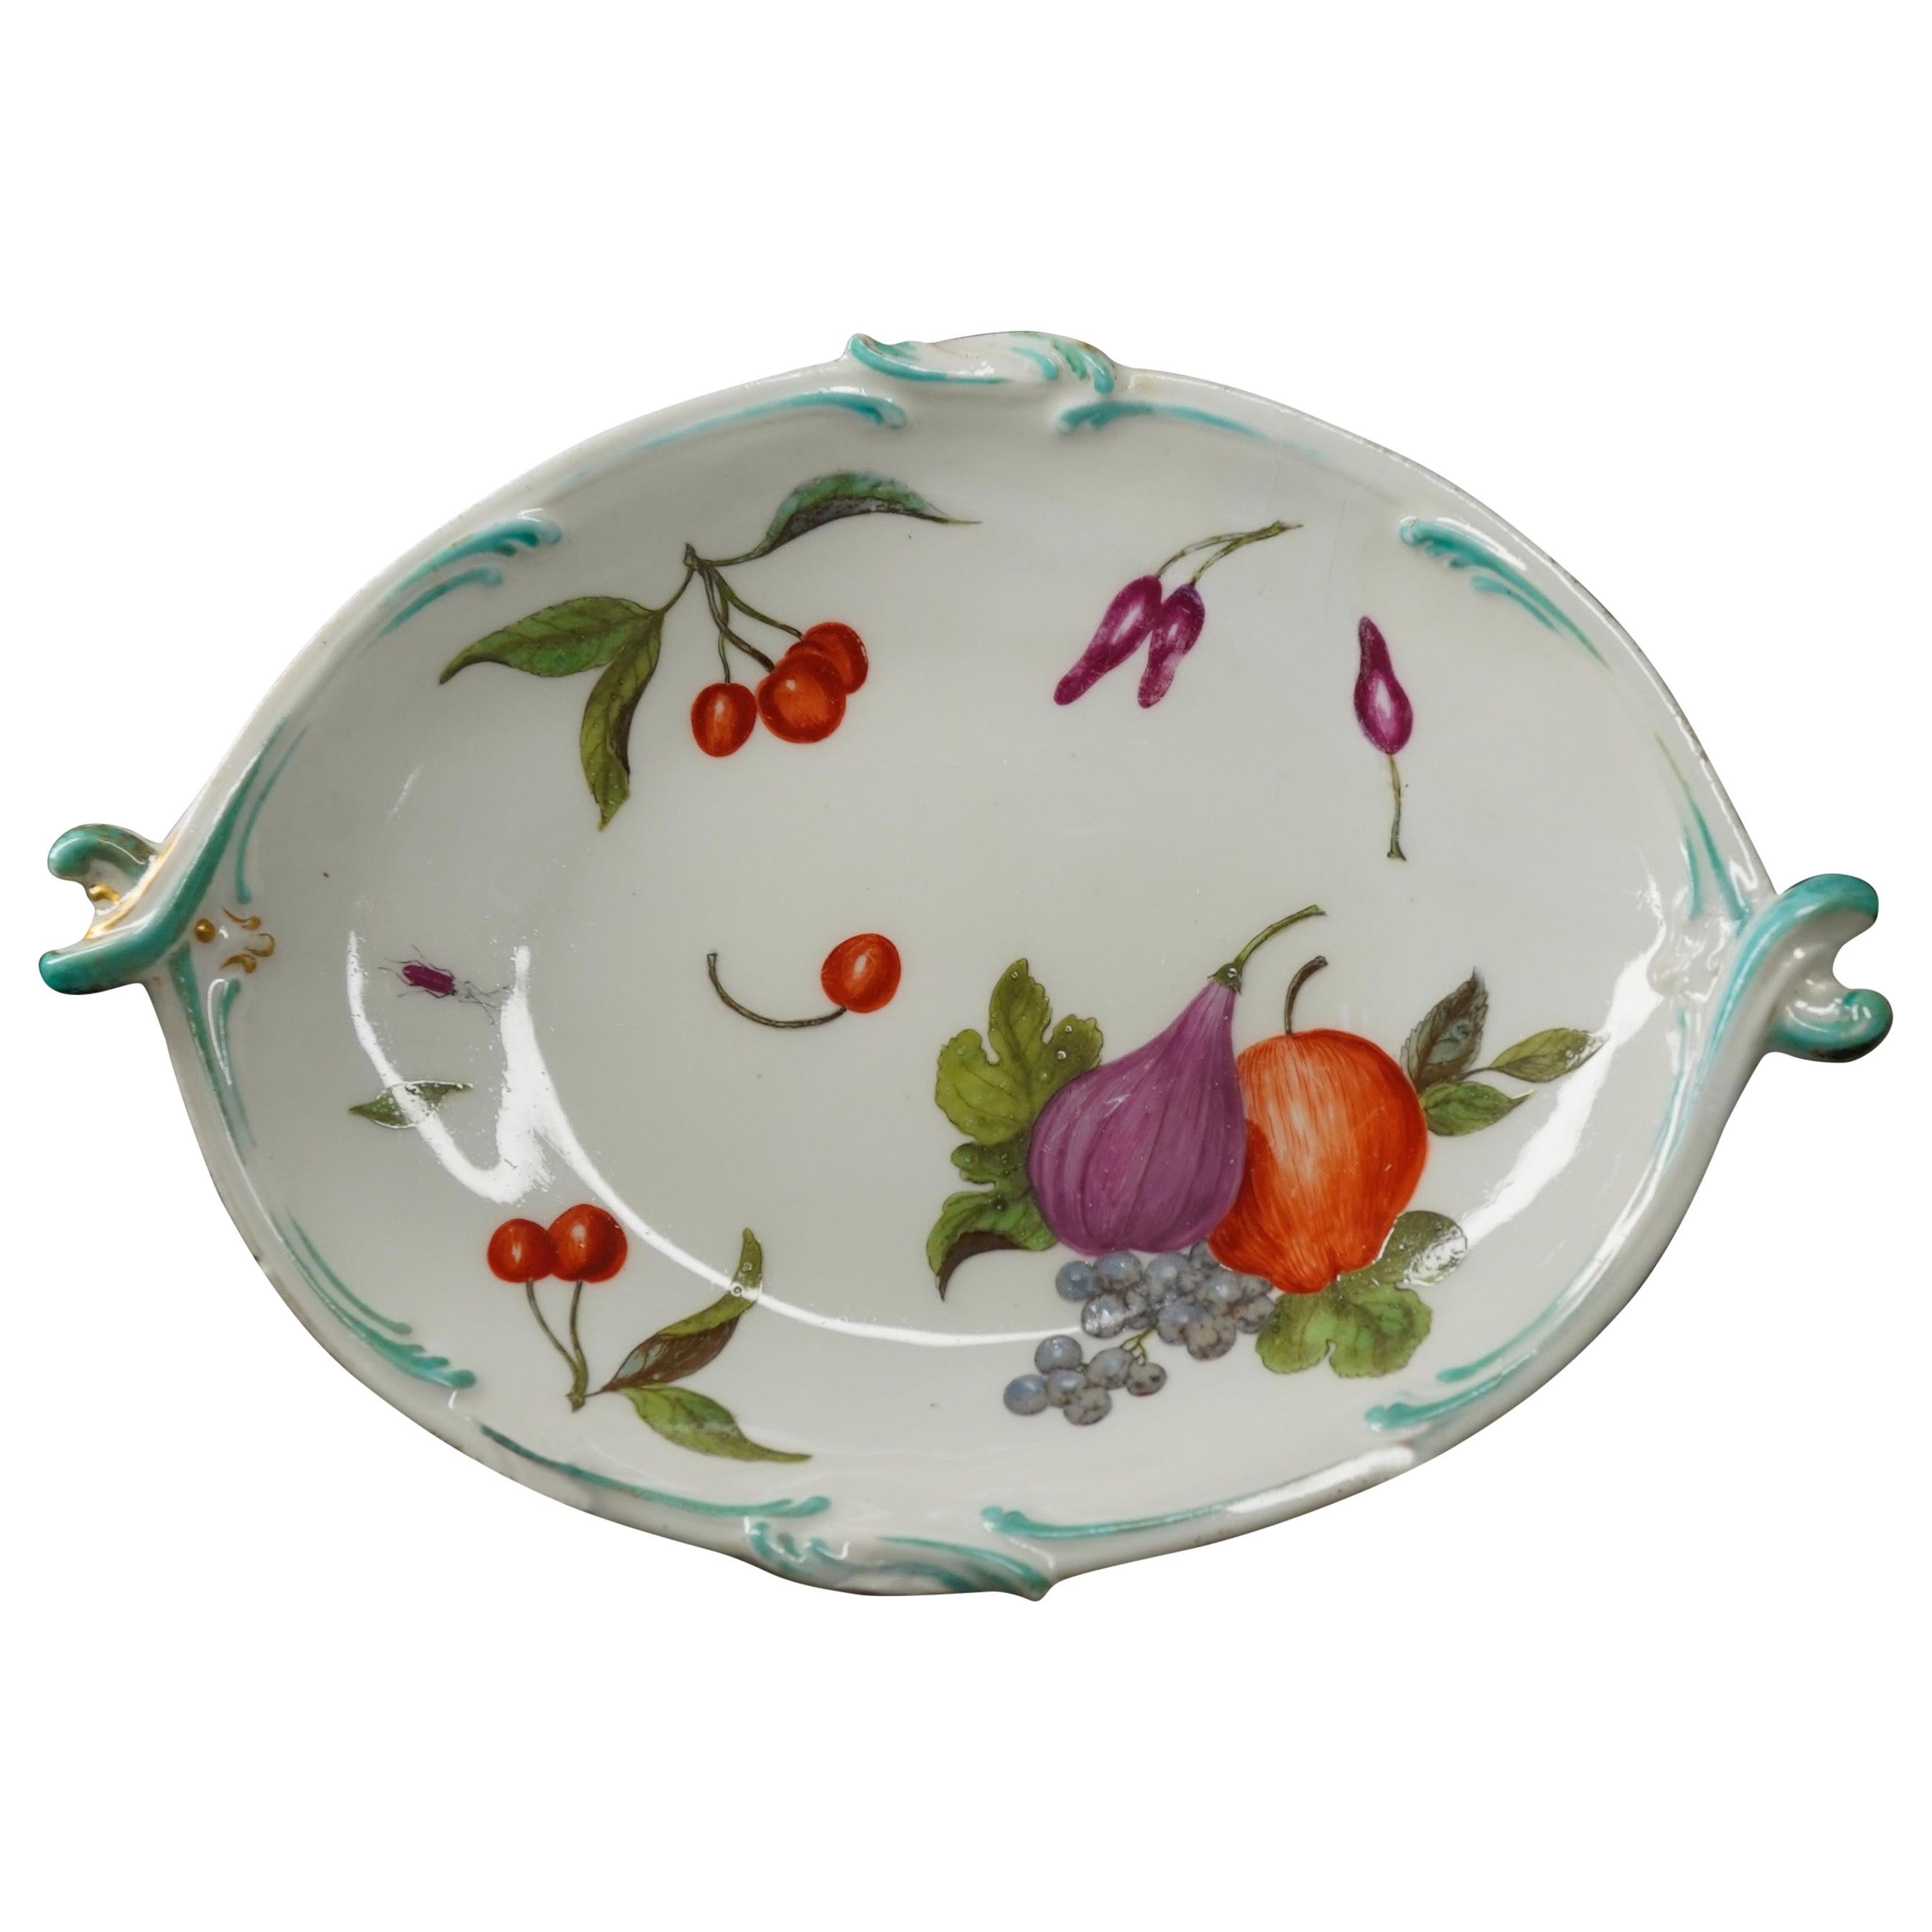 Gold Anchor Chelsea Rococo Shape Dish, Painted with Fruit and Bug, circa 1765